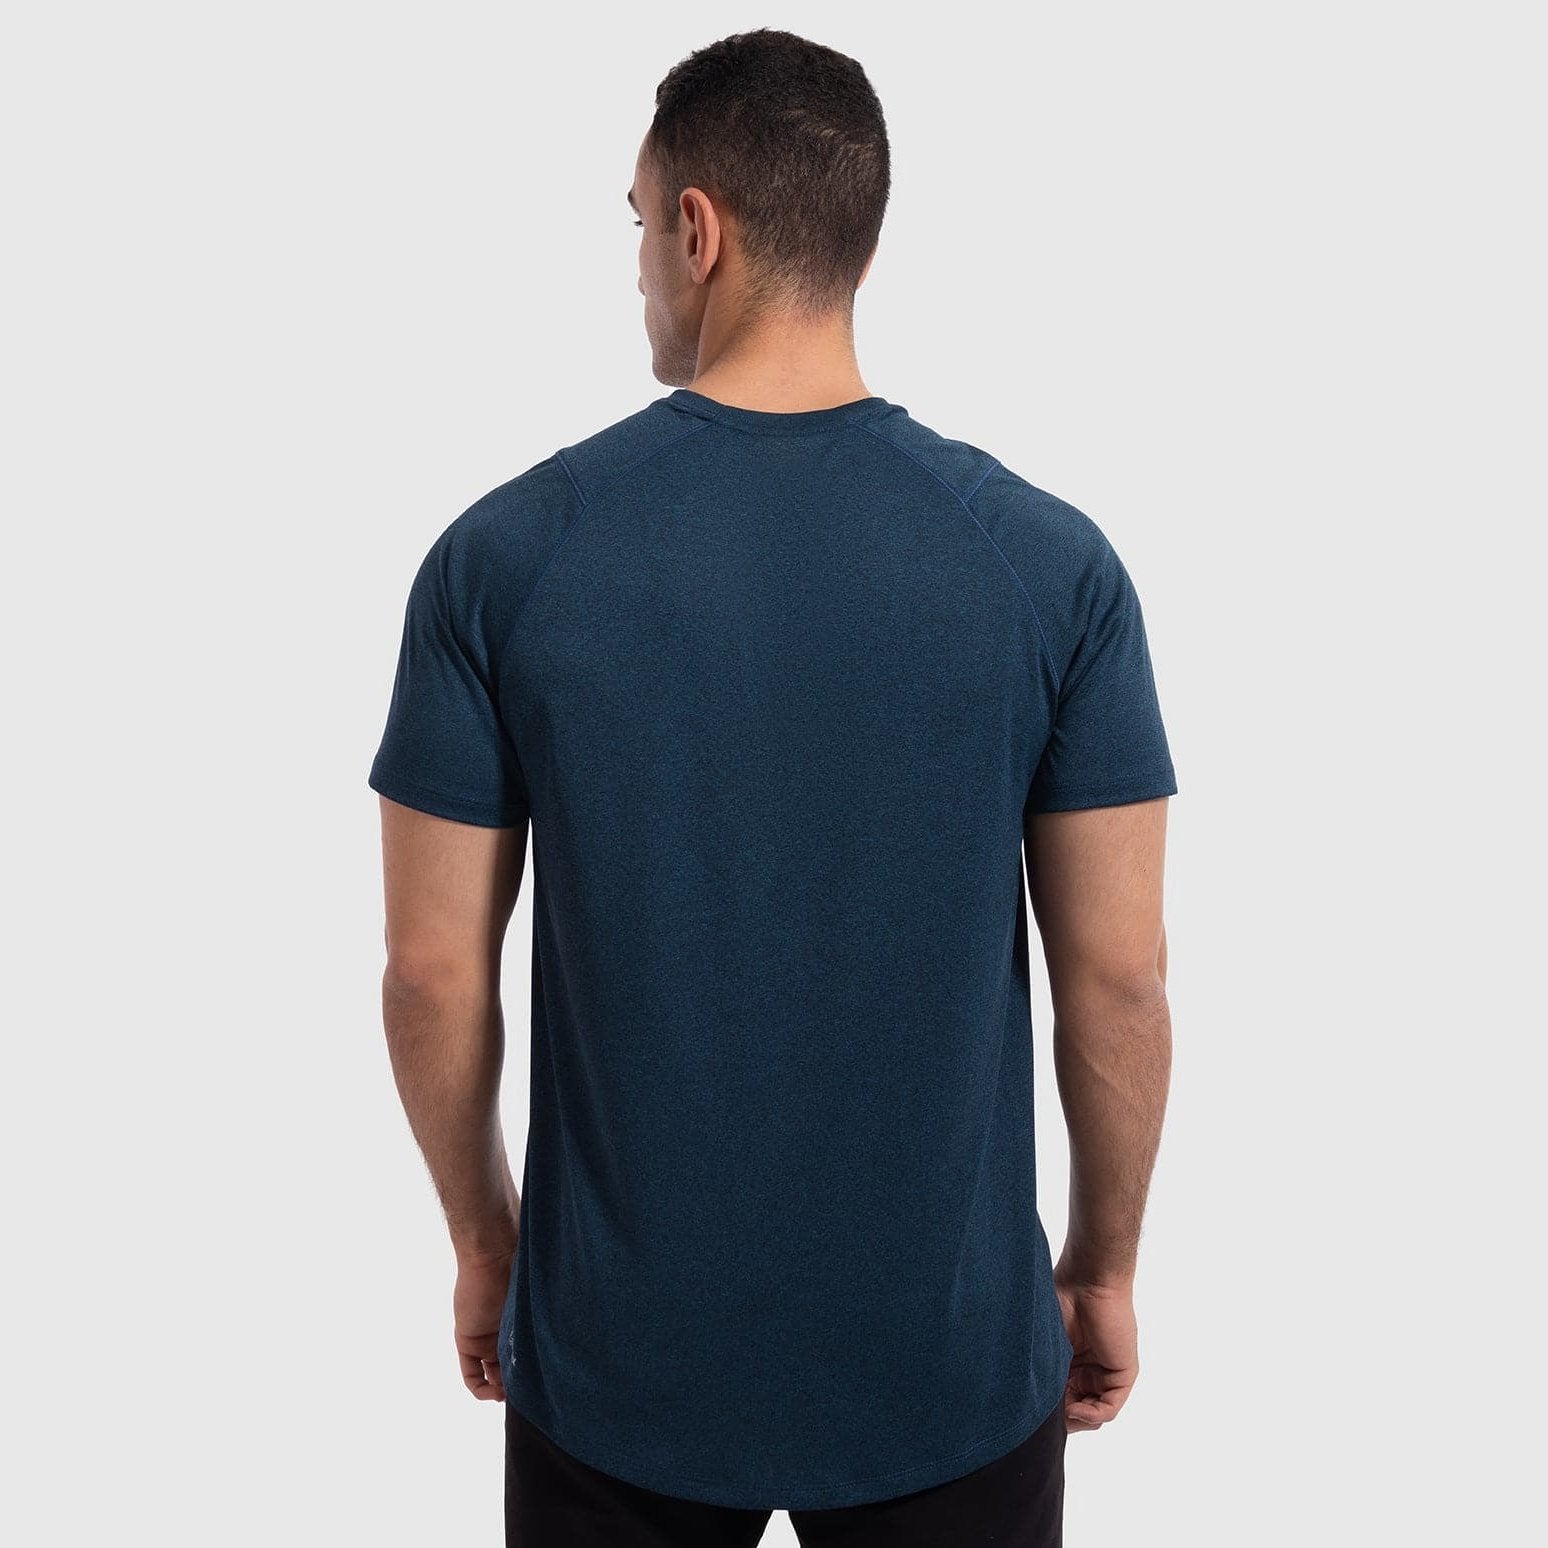 Muscle Fit Training T-shirt in Teal - Sporty Pro